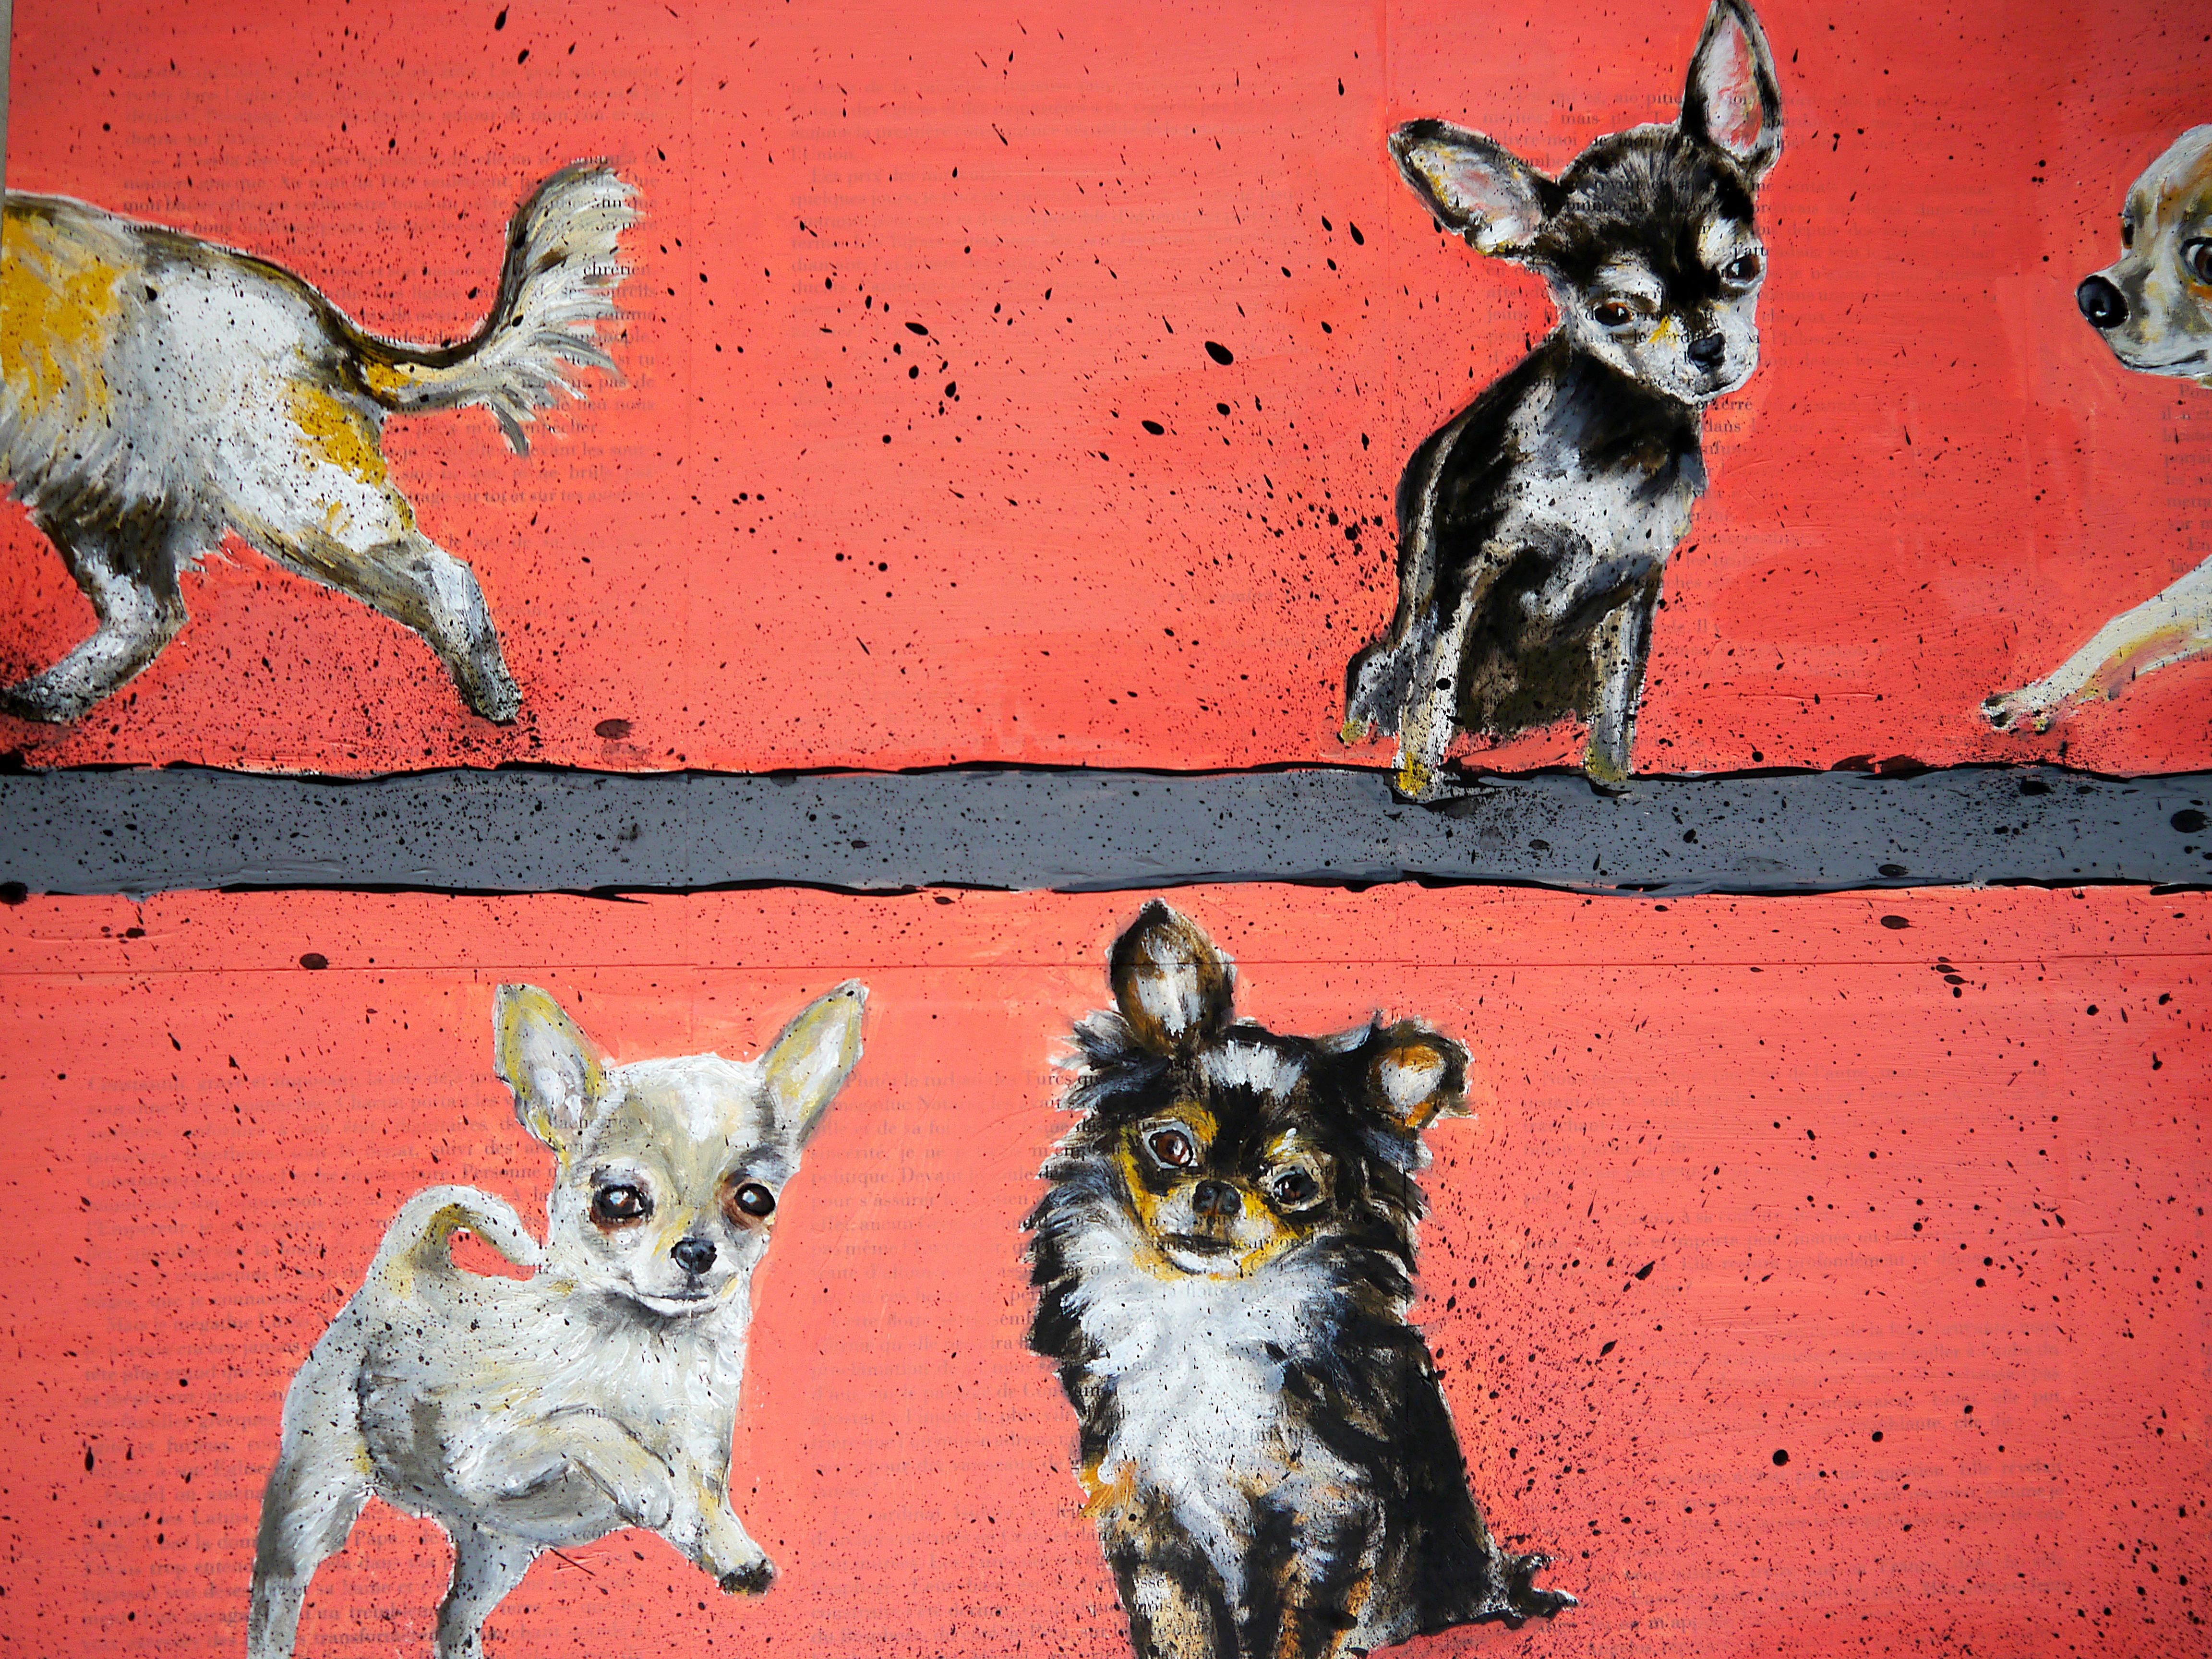 Chihuahua Gang walking  NSWE

Serie of Chihuahua dog walking
Technique: oil, acrylic, and ink on old book pages on wooden frame 55x55cm ■■ 21,6x21,6 inch

Sustainability: Wooden frame is made by the artist by recycling  old books. In an ecological